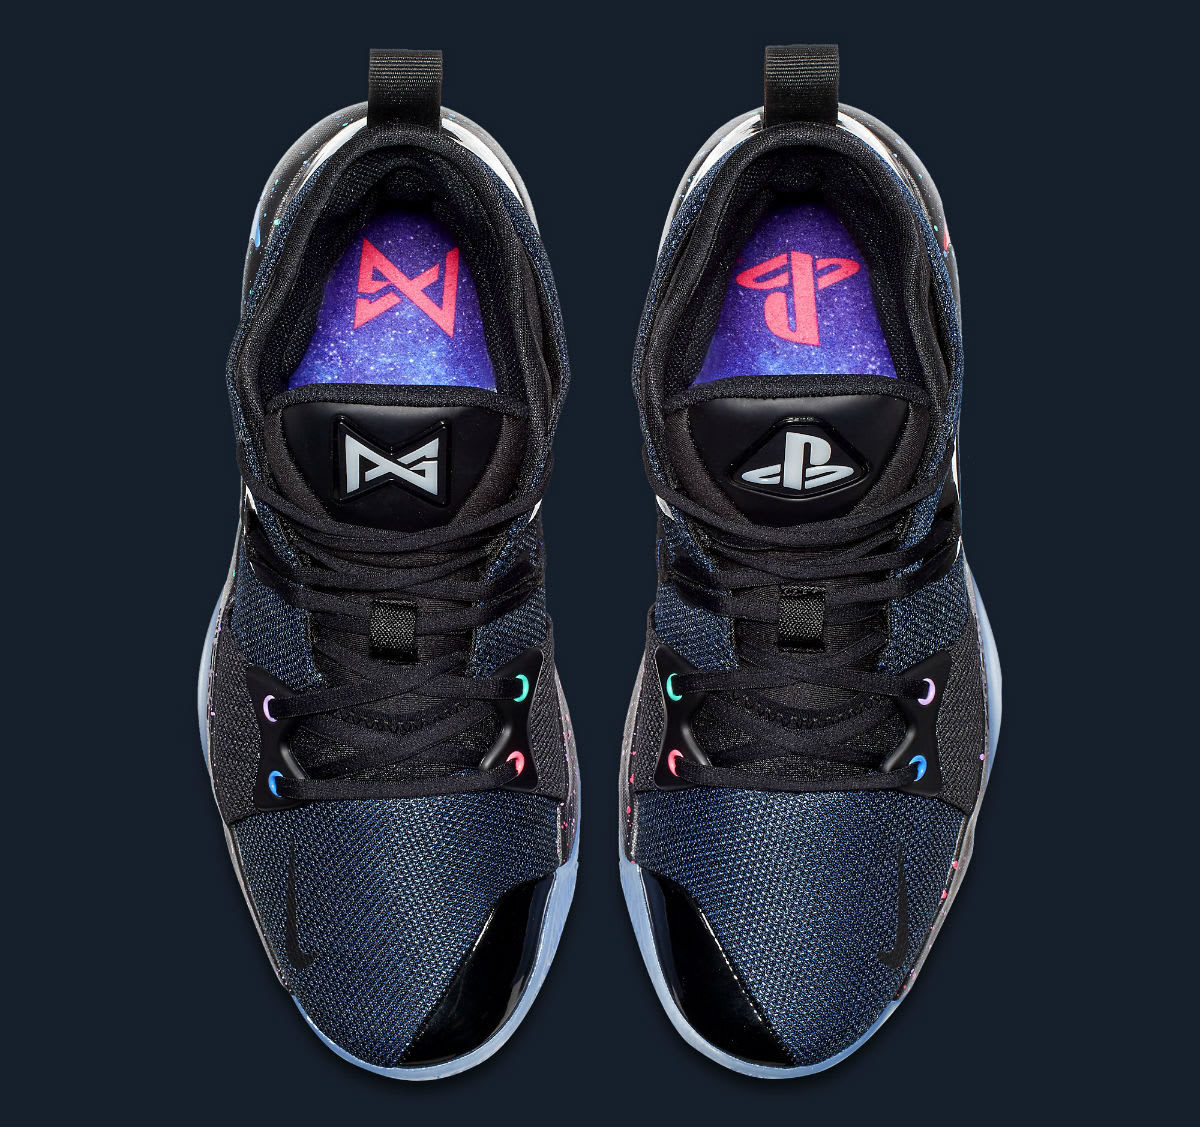 PlayStation x Nike Air Force 1 trainer returns with makeover